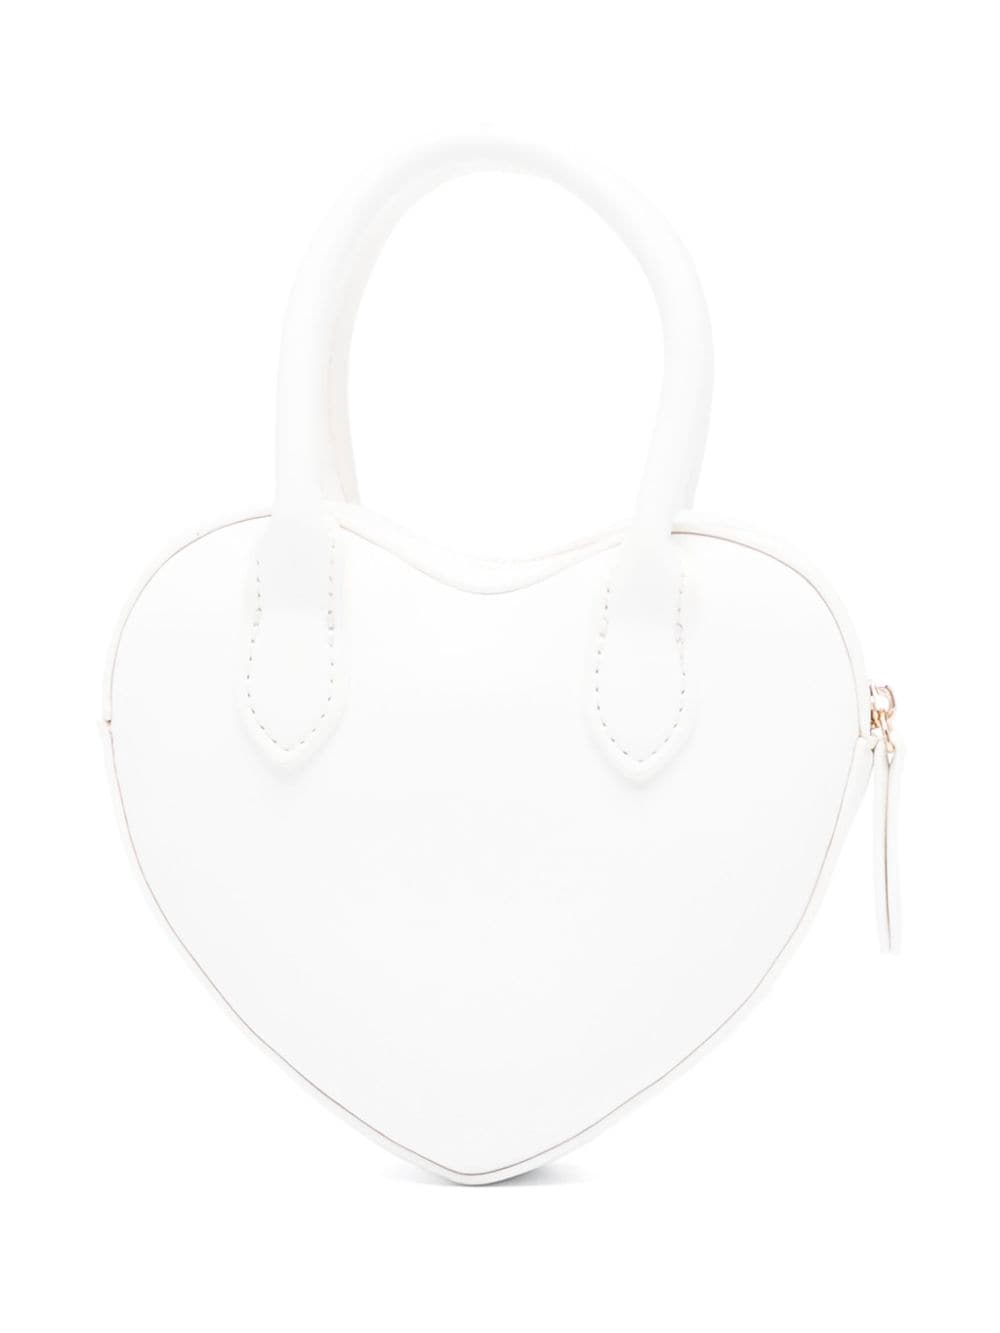 White bag for girls with logo